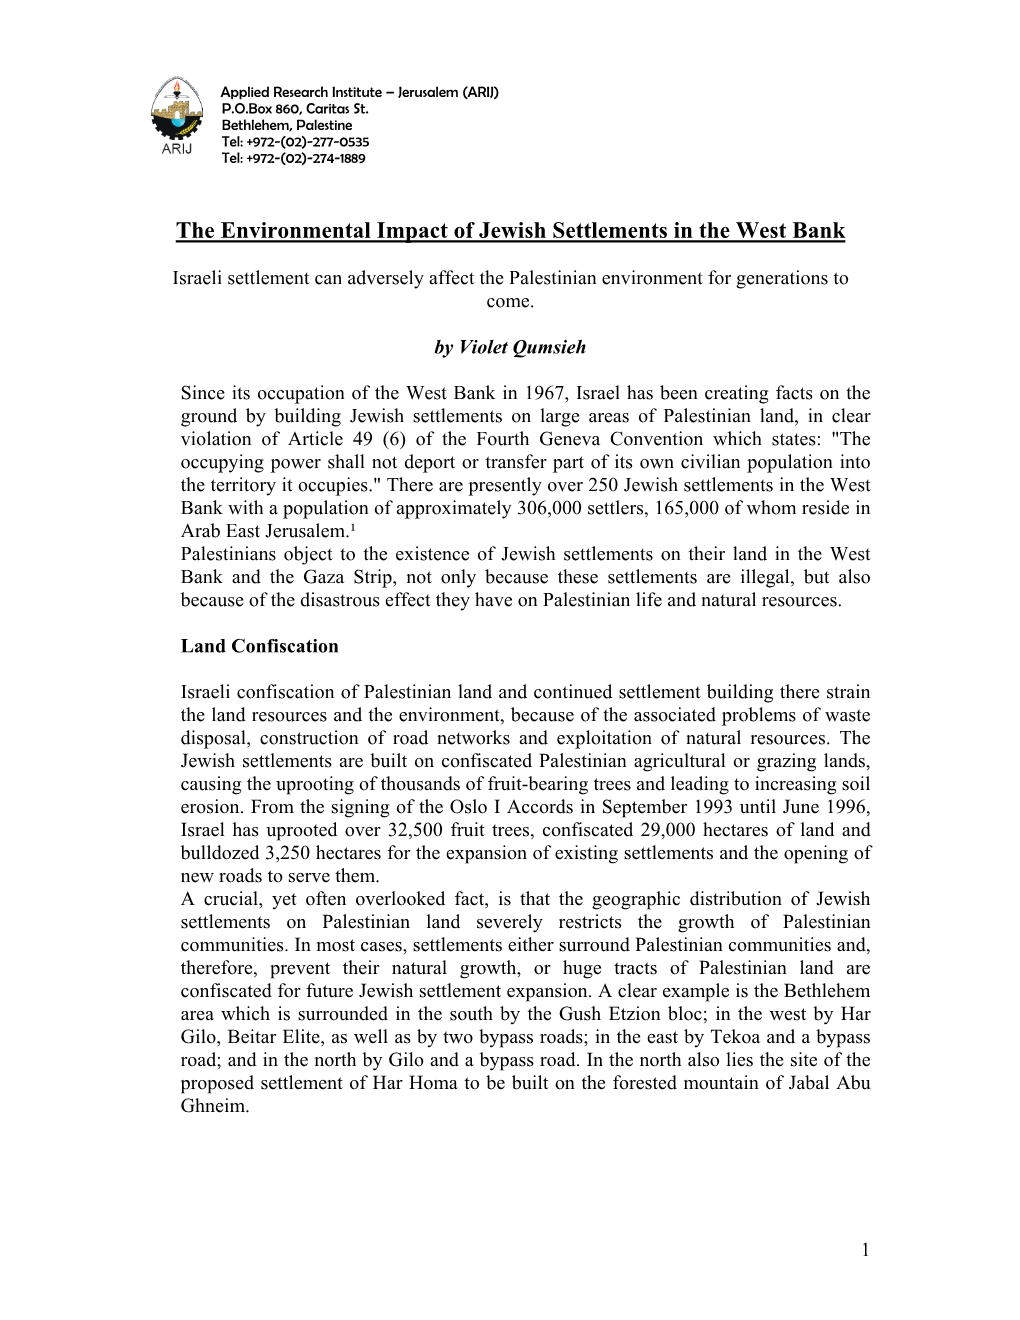 The Environmental Impact of Jewish Settlements in the West Bank